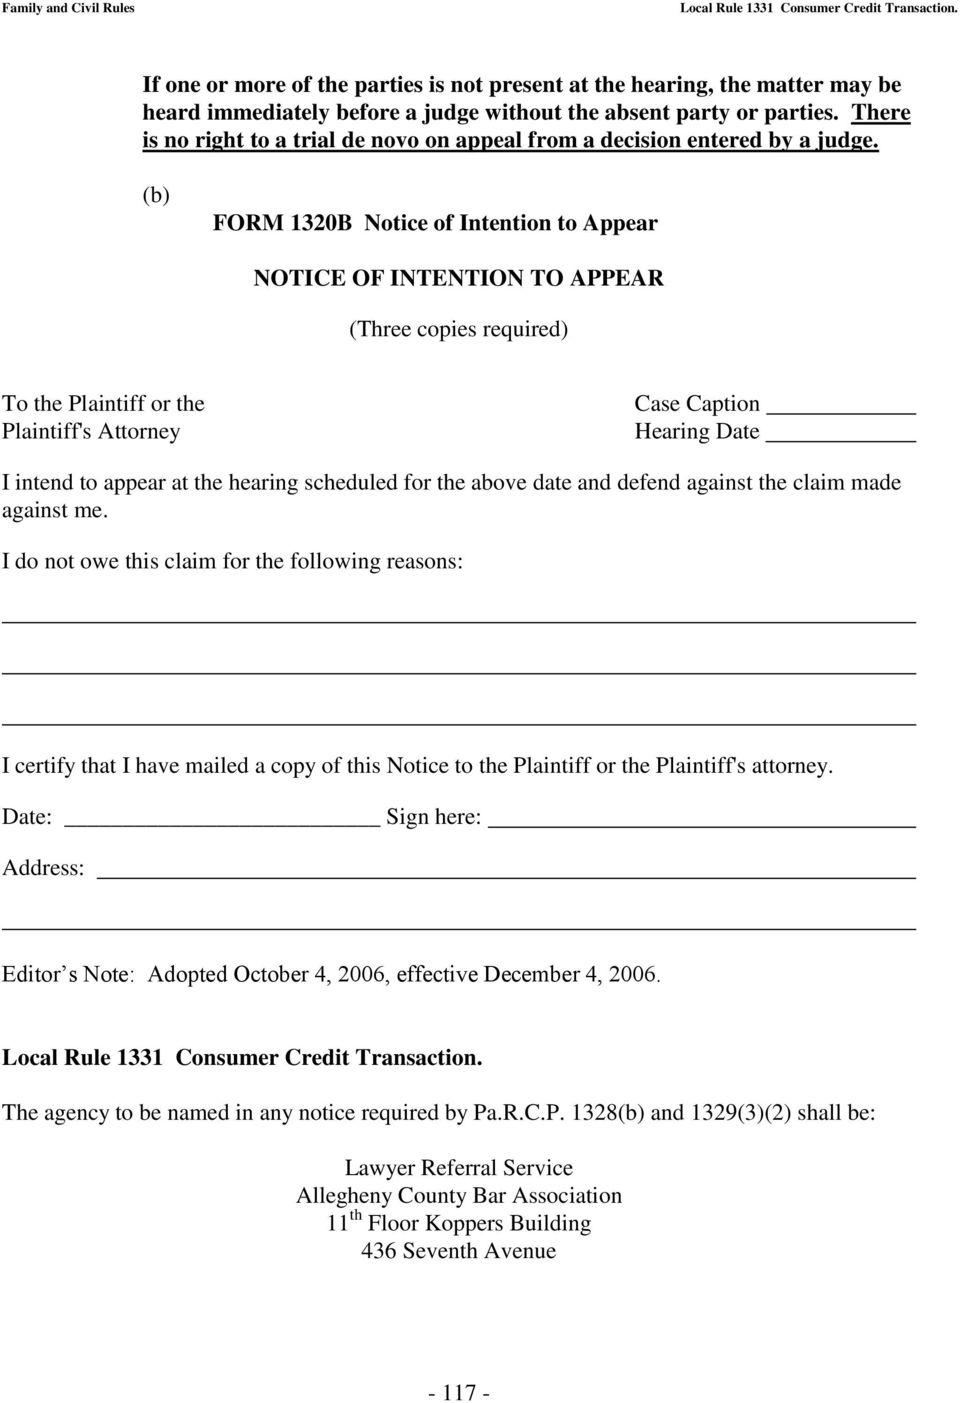 (b) FORM 1320B Notice of Intention to Appear NOTICE OF INTENTION TO APPEAR (Three copies required) To the Plaintiff or the Plaintiff's Attorney Case Caption Hearing Date I intend to appear at the